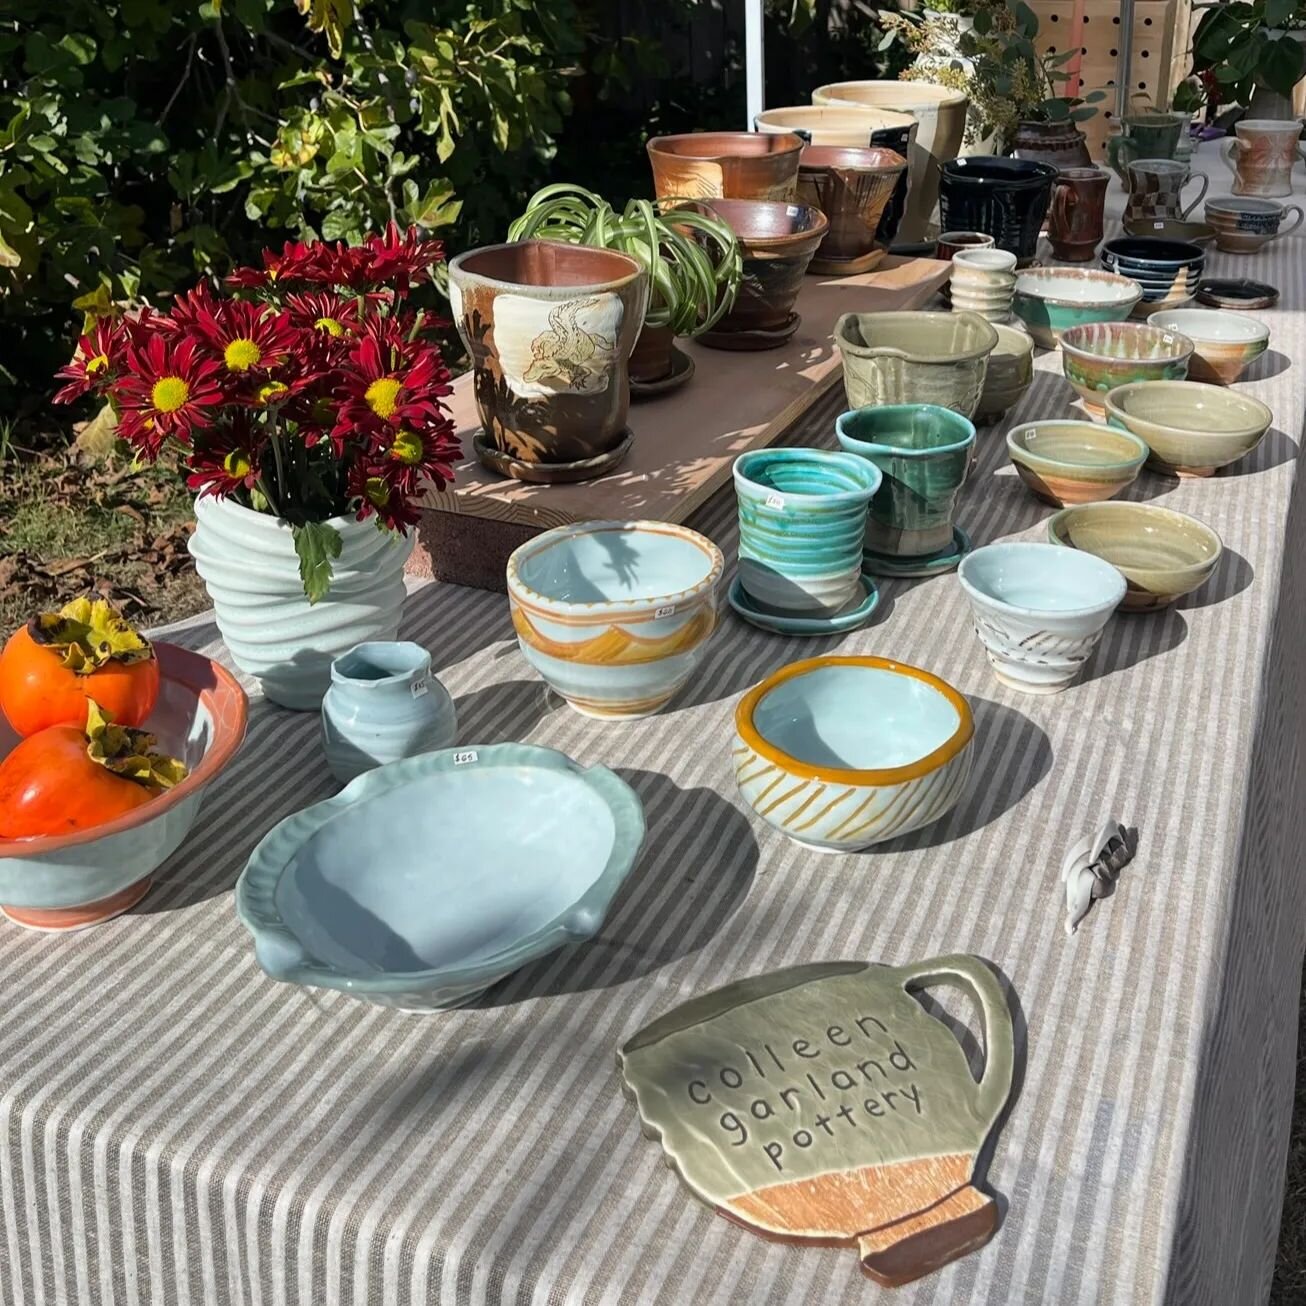 THANK YOU so much to everyone who came to our sale this weekend! I only took a couple photos (thank you @maybe.natalie for sending some!) but I was so happy to see everyone, and grateful for people buying pots 💛 it was a great day, and it felt like 